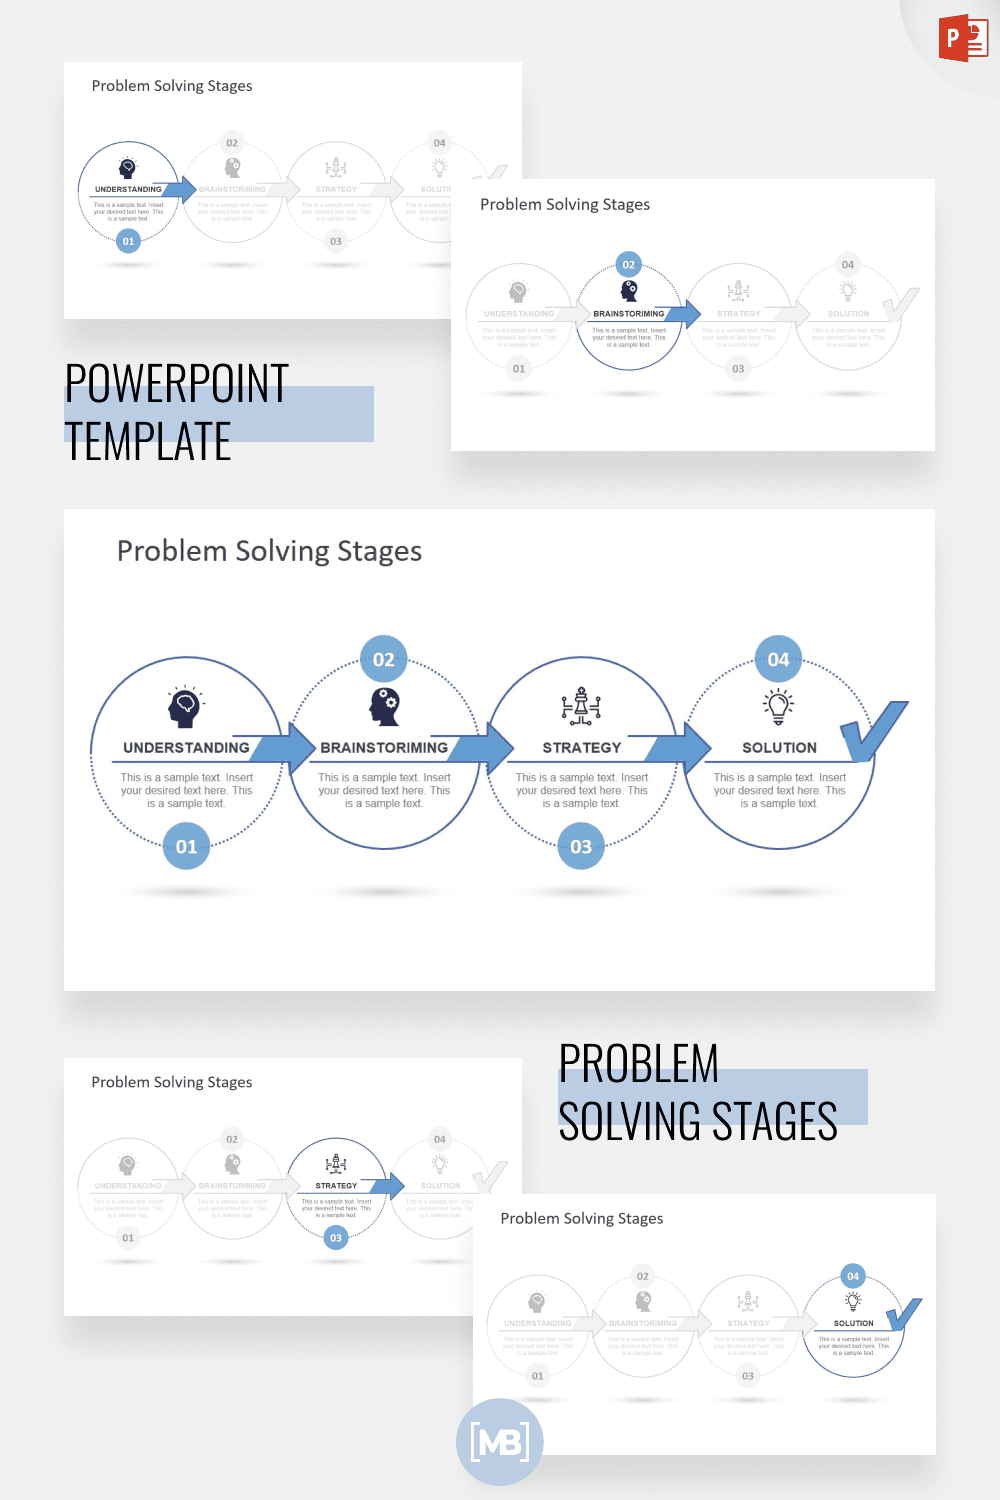 Problem solving stages powerpoint template.